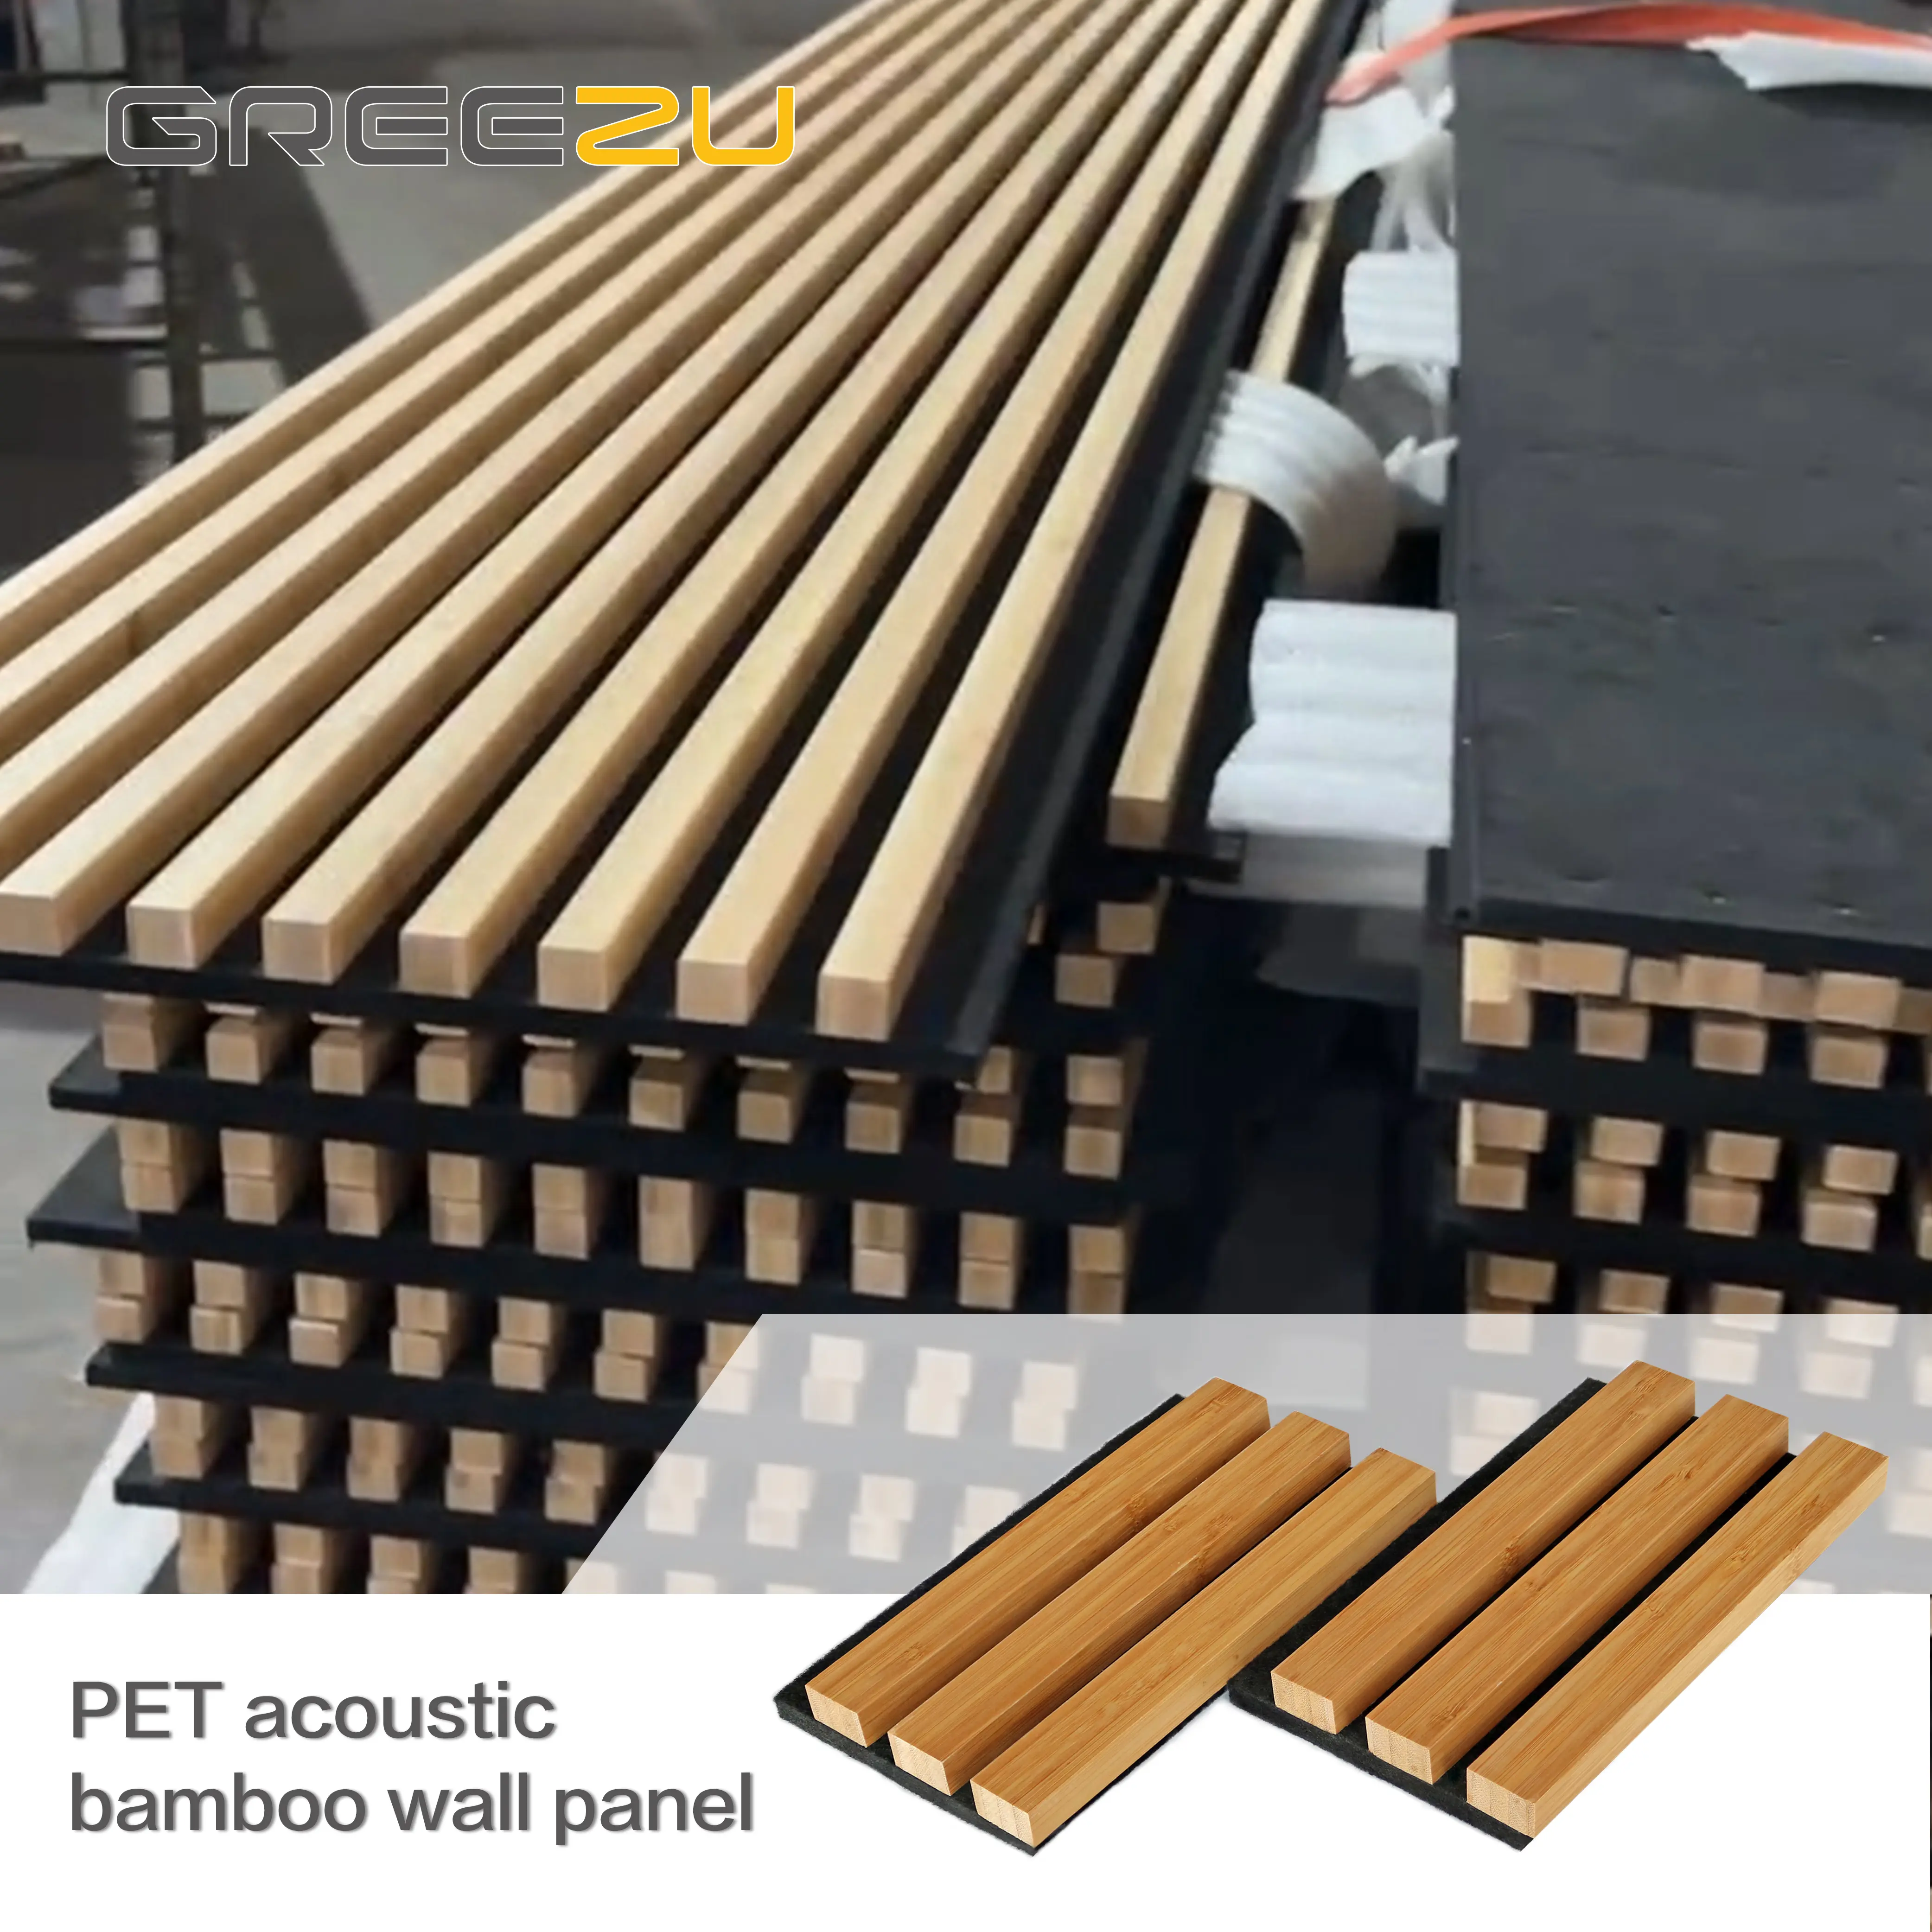 Greezu Direct factory Hot sell akupanel bamboo wood acoustic panel Fluted wall panel wood composite Bamboo wave fluted panel